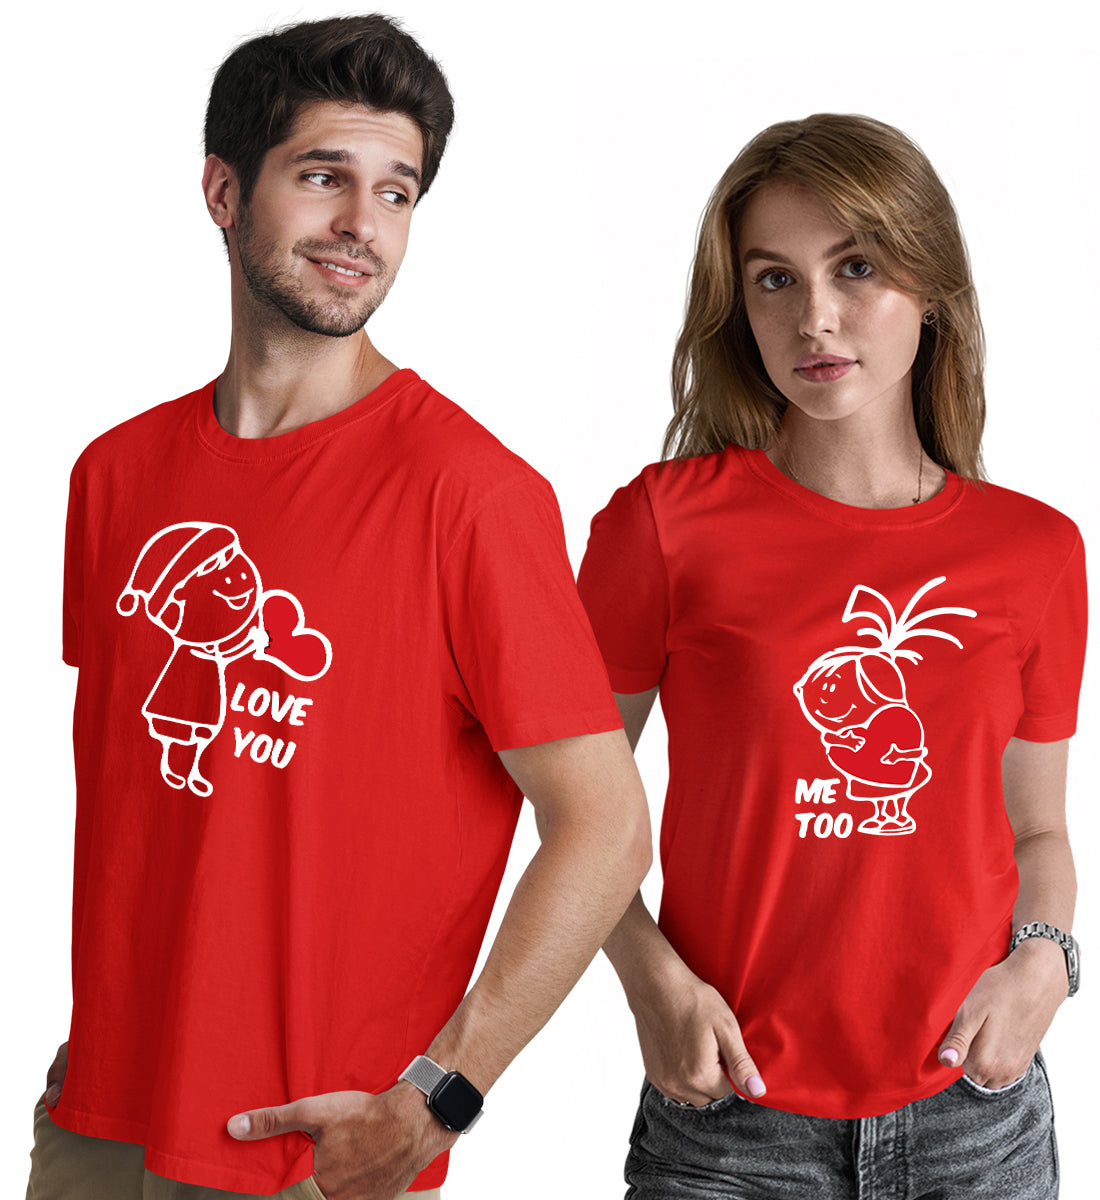 LOVE YOU Couple Love Matching Printed Tshirts (Pack Of 2)